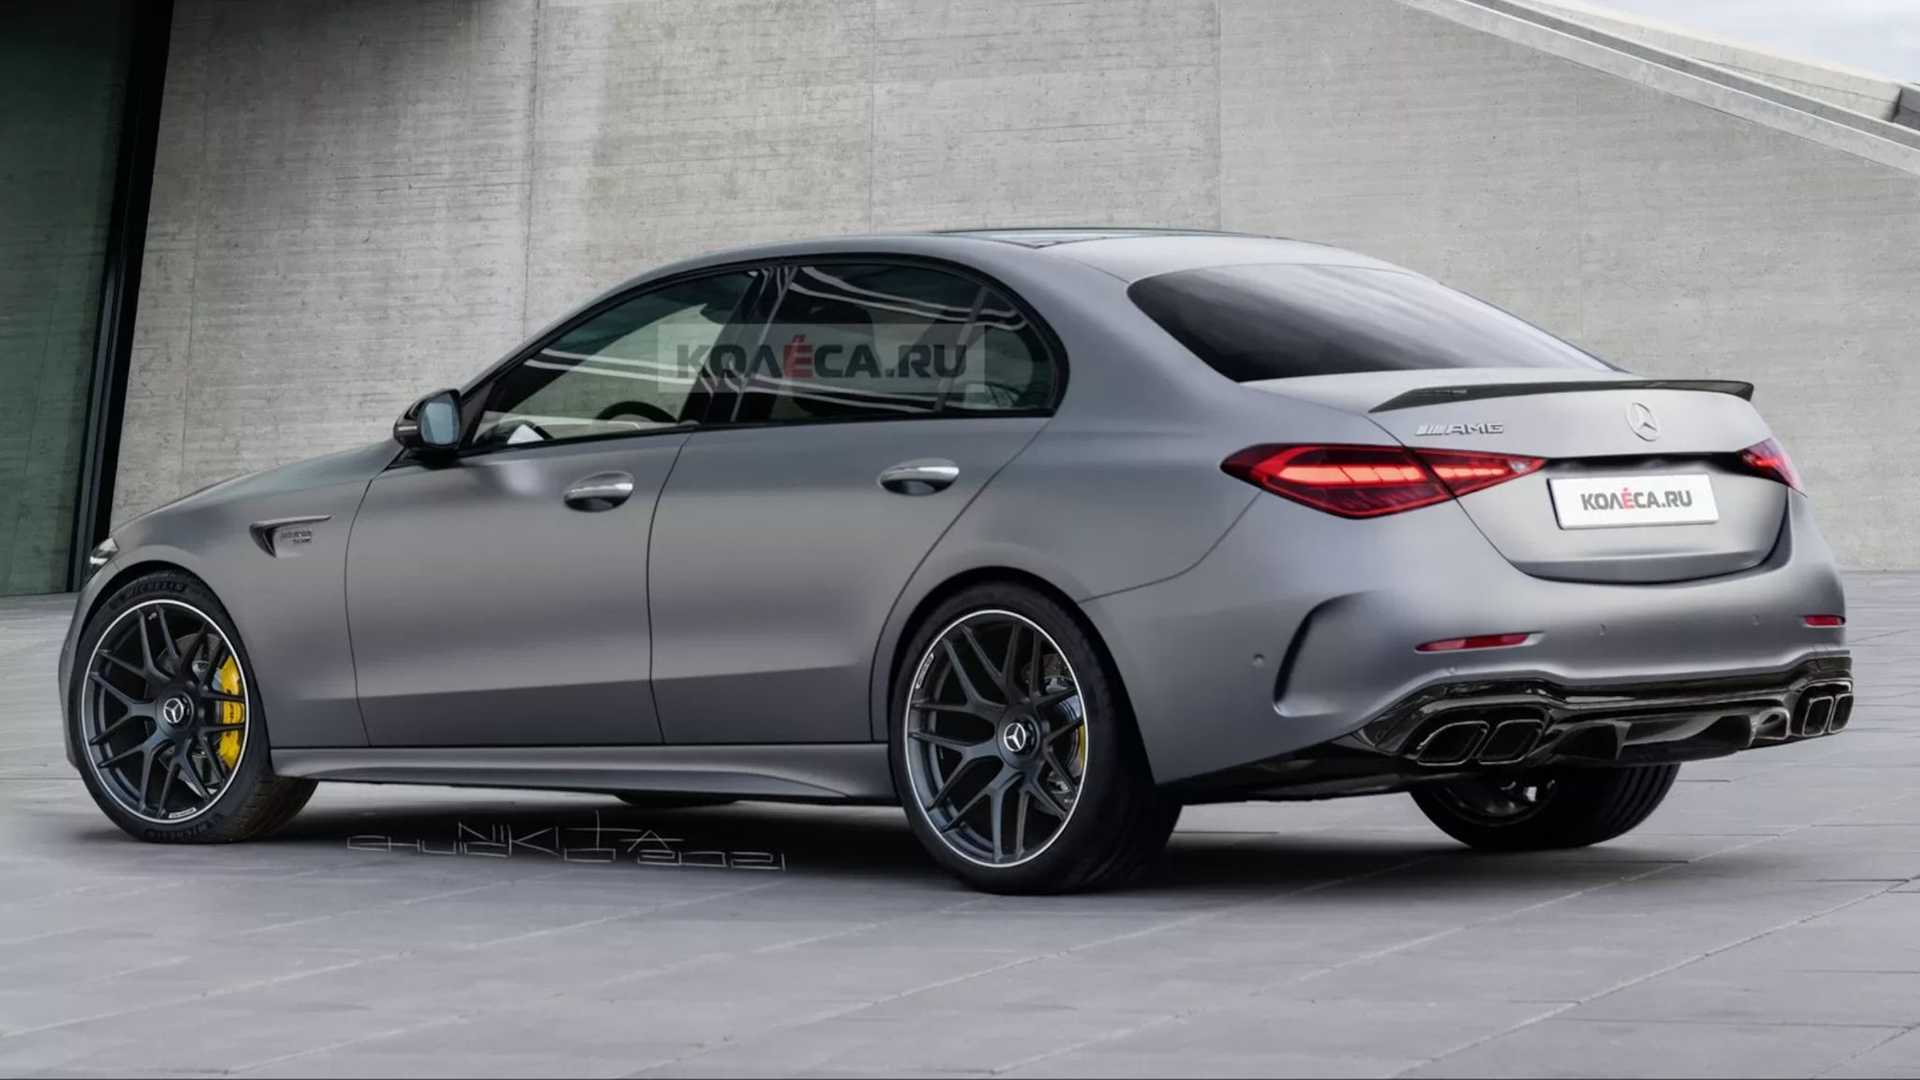 2023 MercedesAMG C63 S E Performance Could Pack As Much As 643 HP (480 kW)